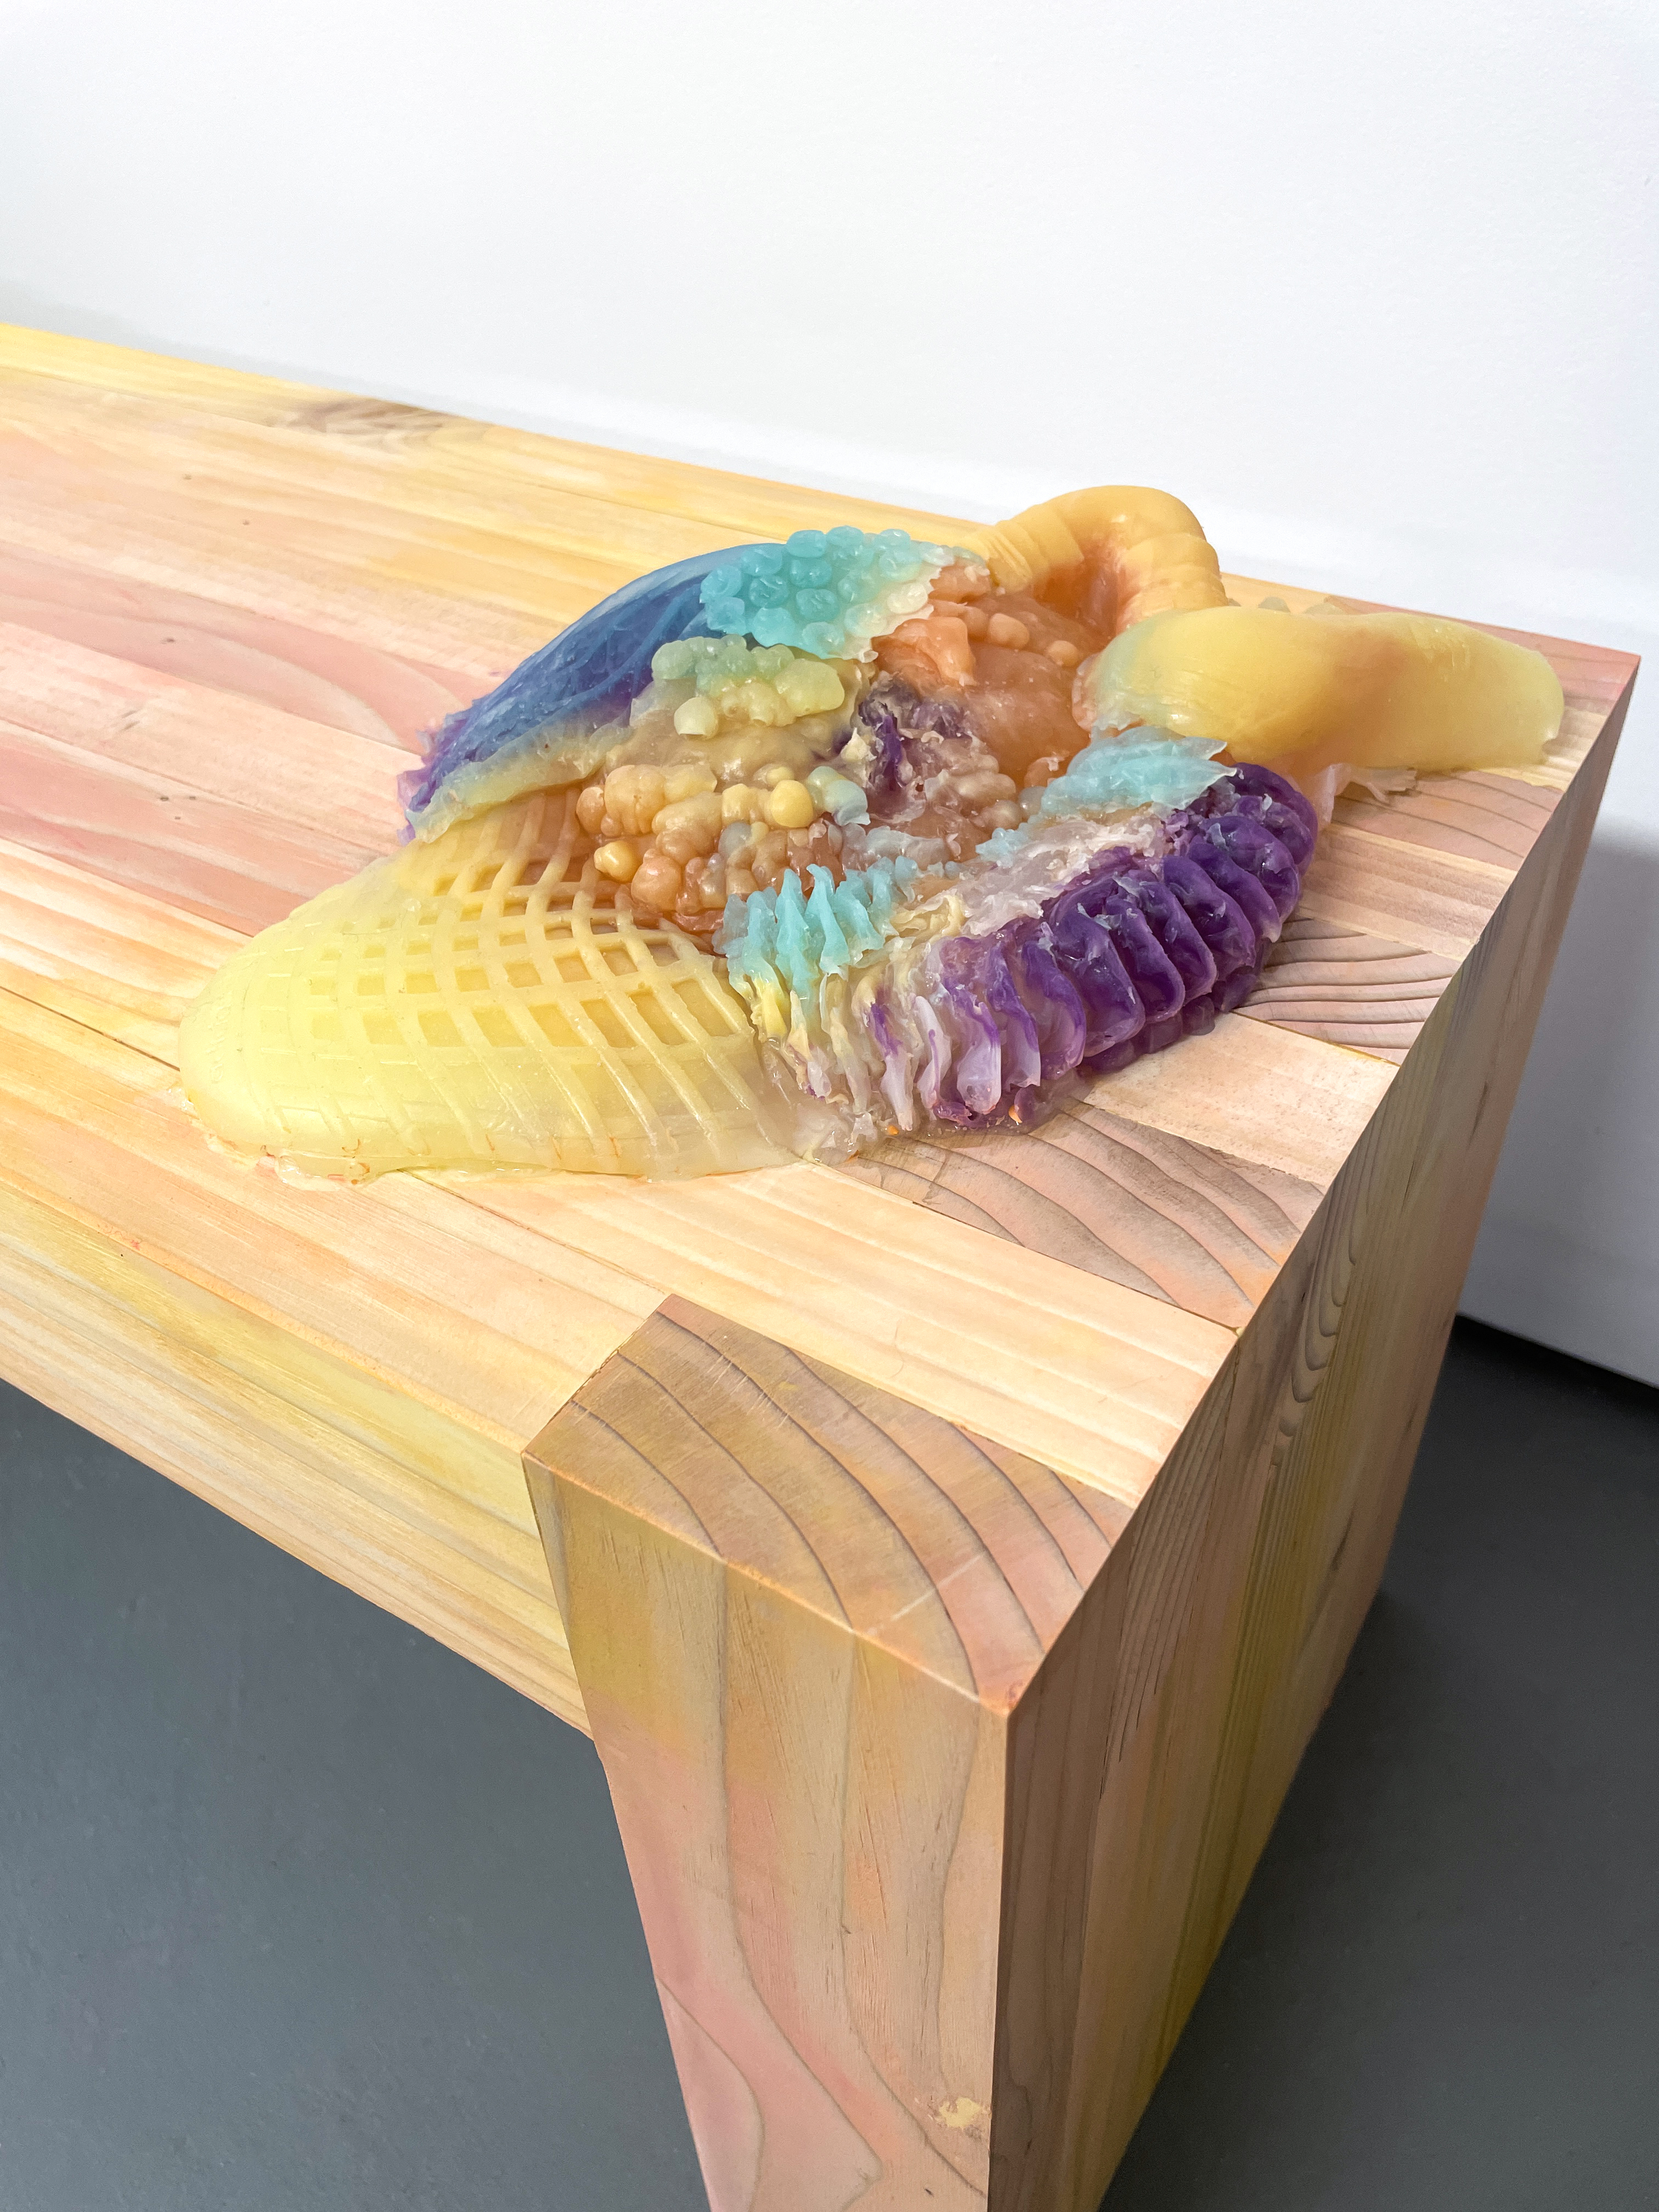 A jelly-like, multicolored amorphous sea-creature-like form sits atop a simple pine bench